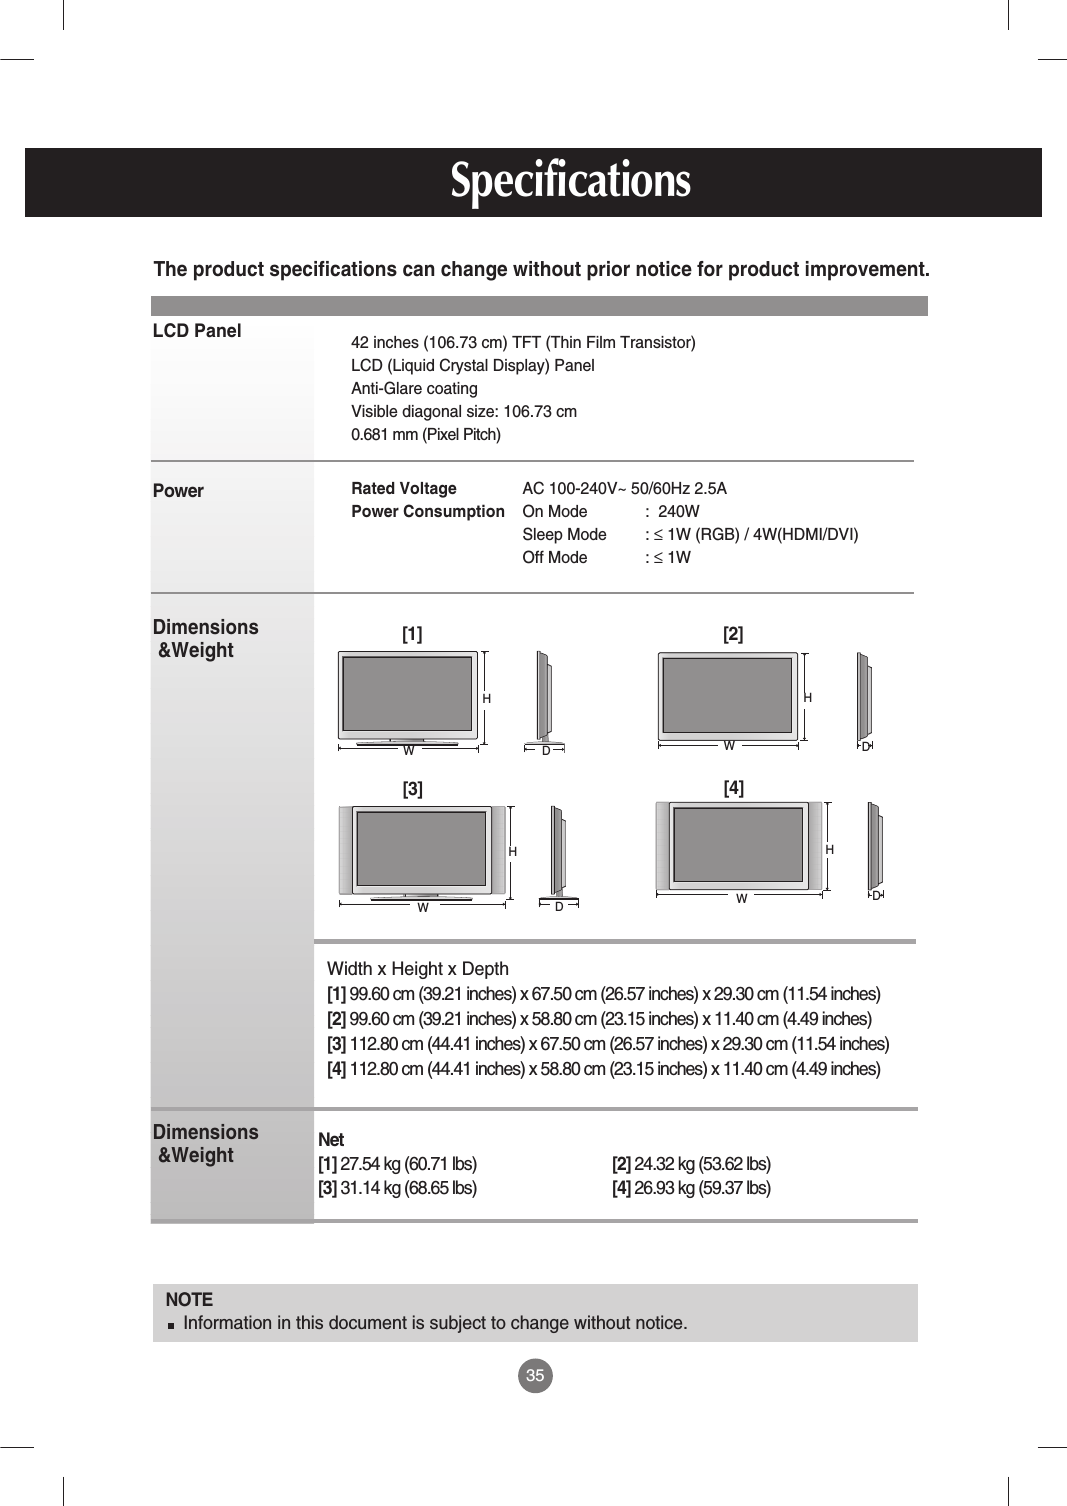 LCD PanelPower Dimensions&amp;WeightDimensions&amp;Weight35NOTEInformation in this document is subject to change without notice.42 inches (106.73 cm) TFT (Thin Film Transistor) LCD (Liquid Crystal Display) PanelAnti-Glare coatingVisible diagonal size: 106.73 cm0.681 mm (Pixel Pitch)Rated Voltage  AC 100-240V~ 50/60Hz 2.5APower Consumption On Mode :  240WSleep Mode : ≤1W (RGB) / 4W(HDMI/DVI)Off Mode : ≤1W The product specifications can change without prior notice for product improvement.SpecificationsWidth x Height x Depth[1] 99.60 cm (39.21 inches) x 67.50 cm (26.57 inches) x 29.30 cm (11.54 inches)[2] 99.60 cm (39.21 inches) x 58.80 cm (23.15 inches) x 11.40 cm (4.49 inches)[3] 112.80 cm (44.41 inches) x 67.50 cm (26.57 inches) x 29.30 cm (11.54 inches)[4] 112.80 cm (44.41 inches) x 58.80 cm (23.15 inches) x 11.40 cm (4.49 inches)[1] WH[2] WH[3] WHDDDD[4] WHNet[1] 27.54 kg (60.71 lbs) [2] 24.32 kg (53.62 lbs)[3] 31.14 kg (68.65 lbs) [4] 26.93 kg (59.37 lbs)